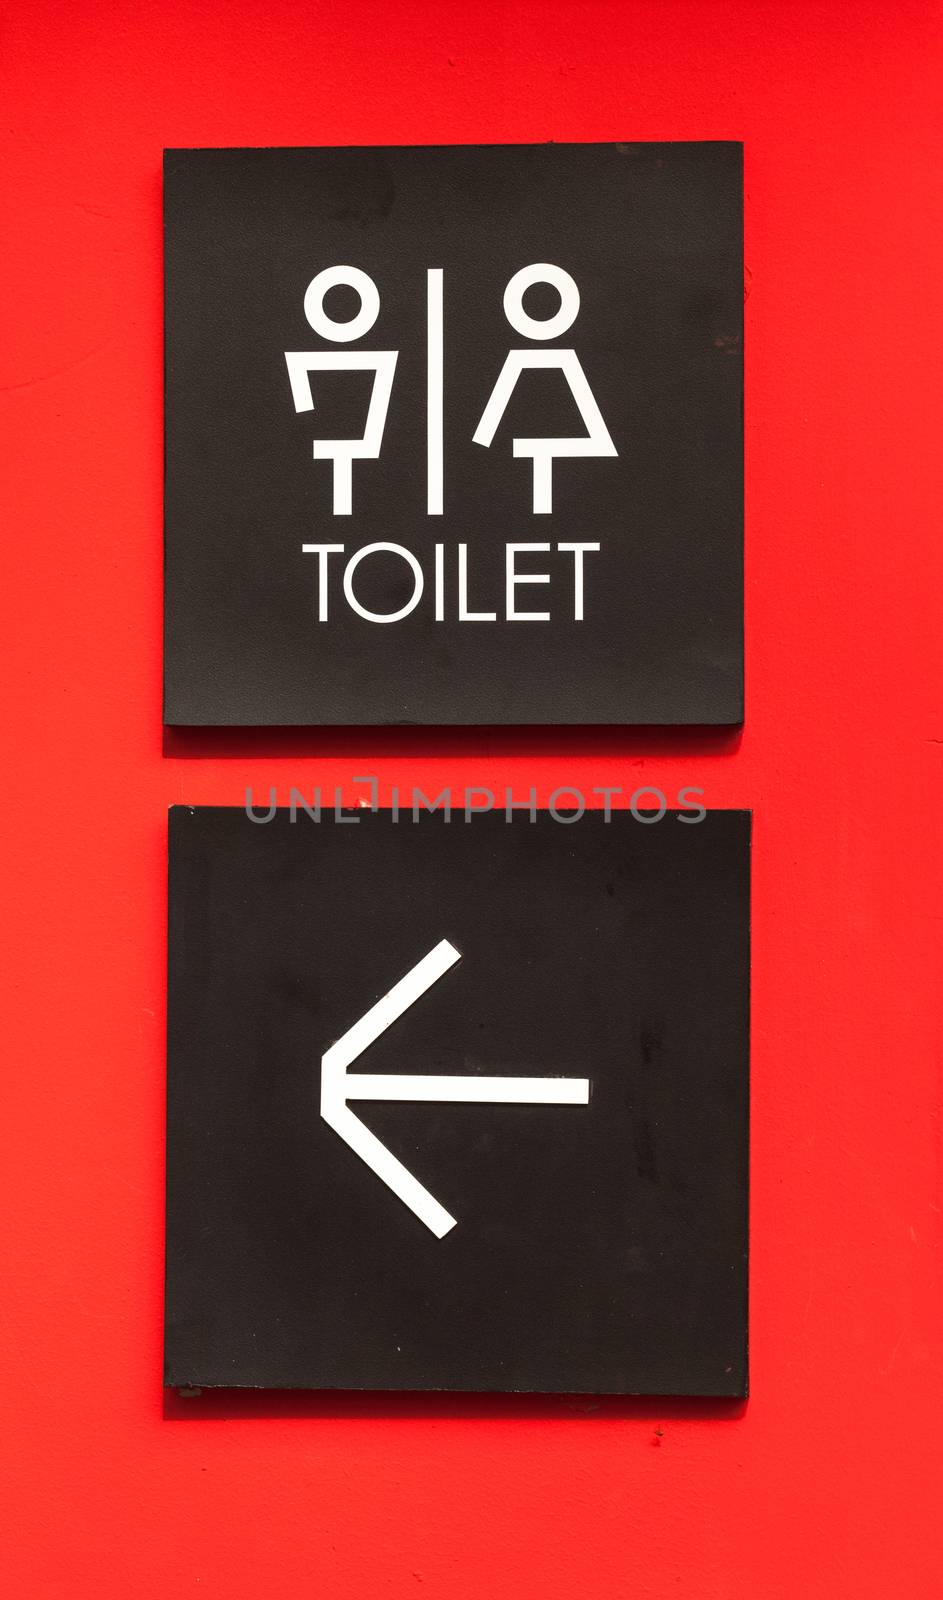 Unisex restroom or toilet and arrow sign on red wall style bouti by nopparats